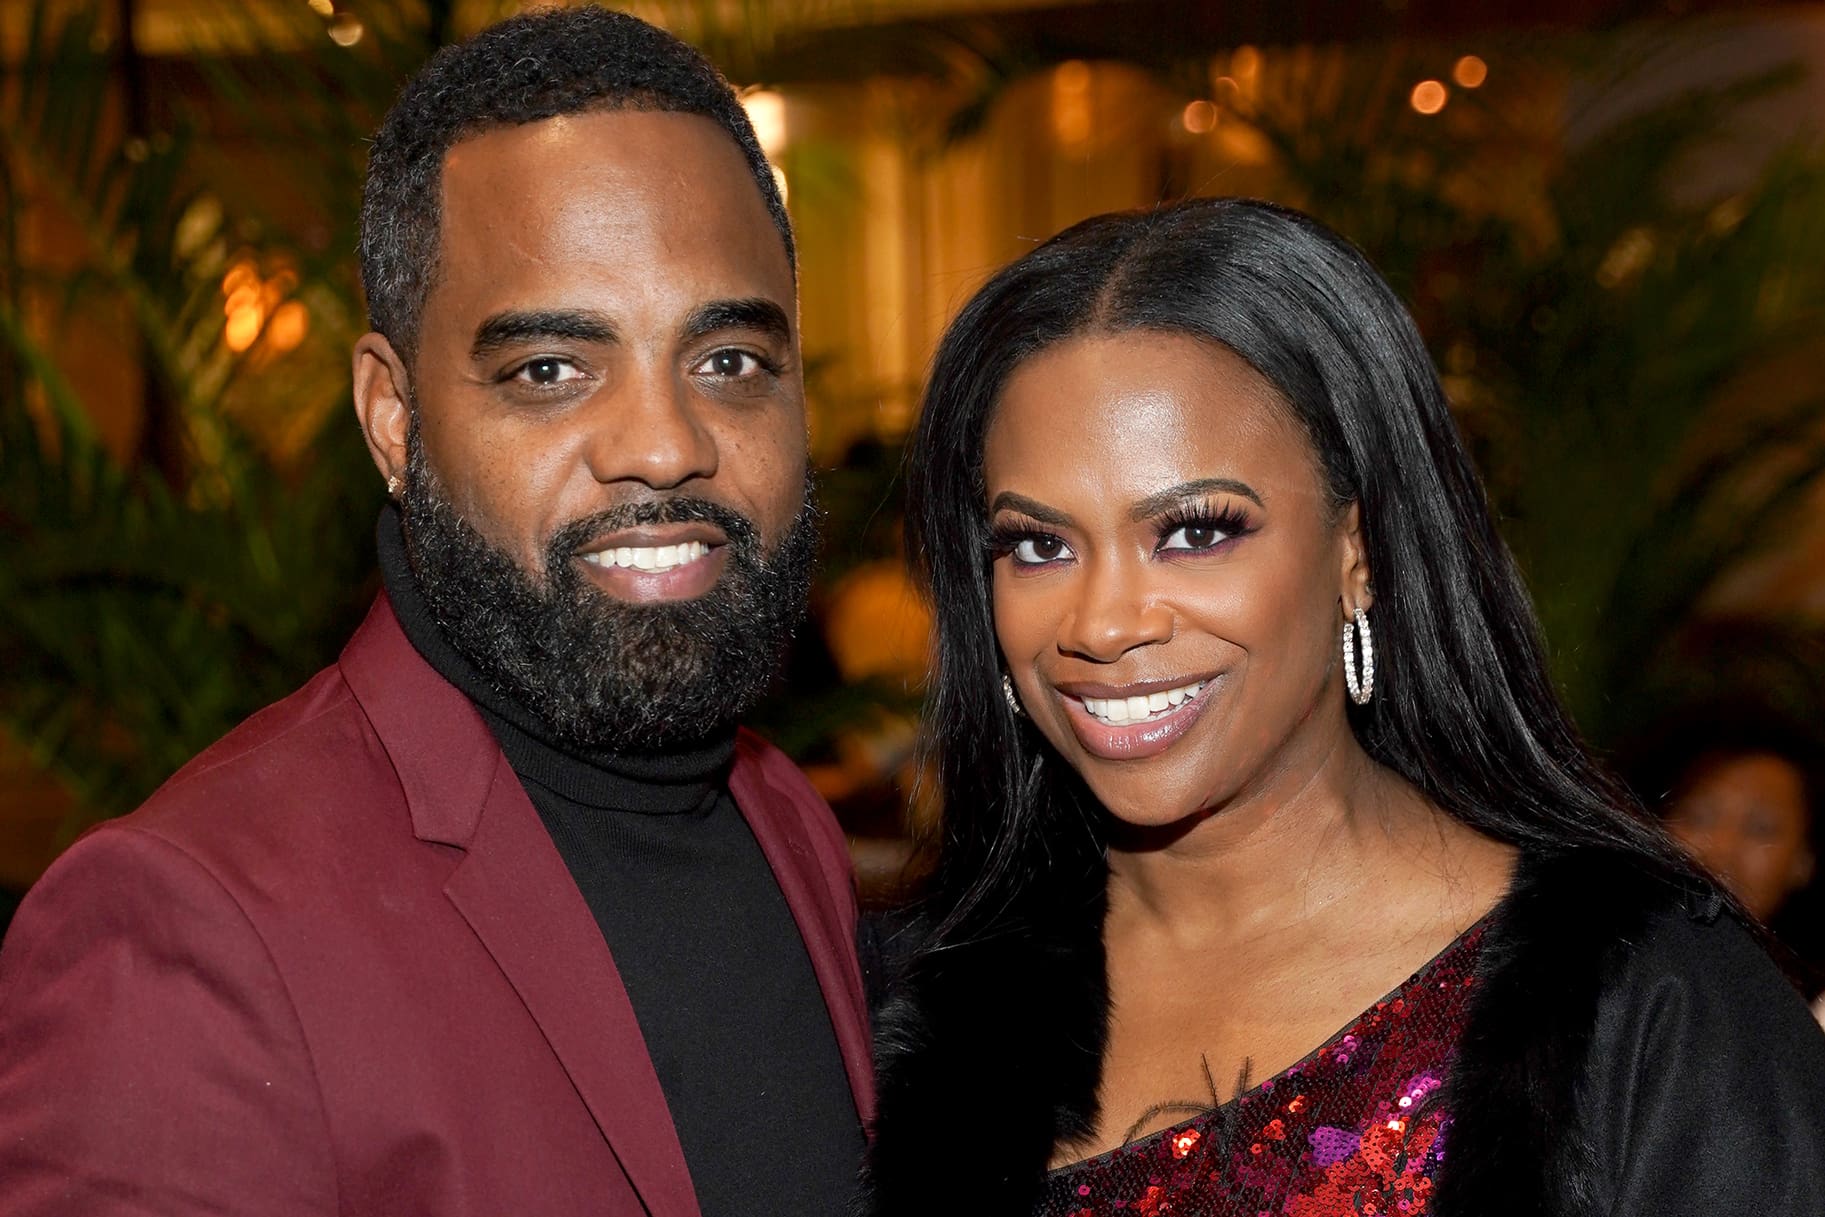 Todd Tucker Calls Fans And Followers To Vote - See Him And Kandi Burruss In This Photo